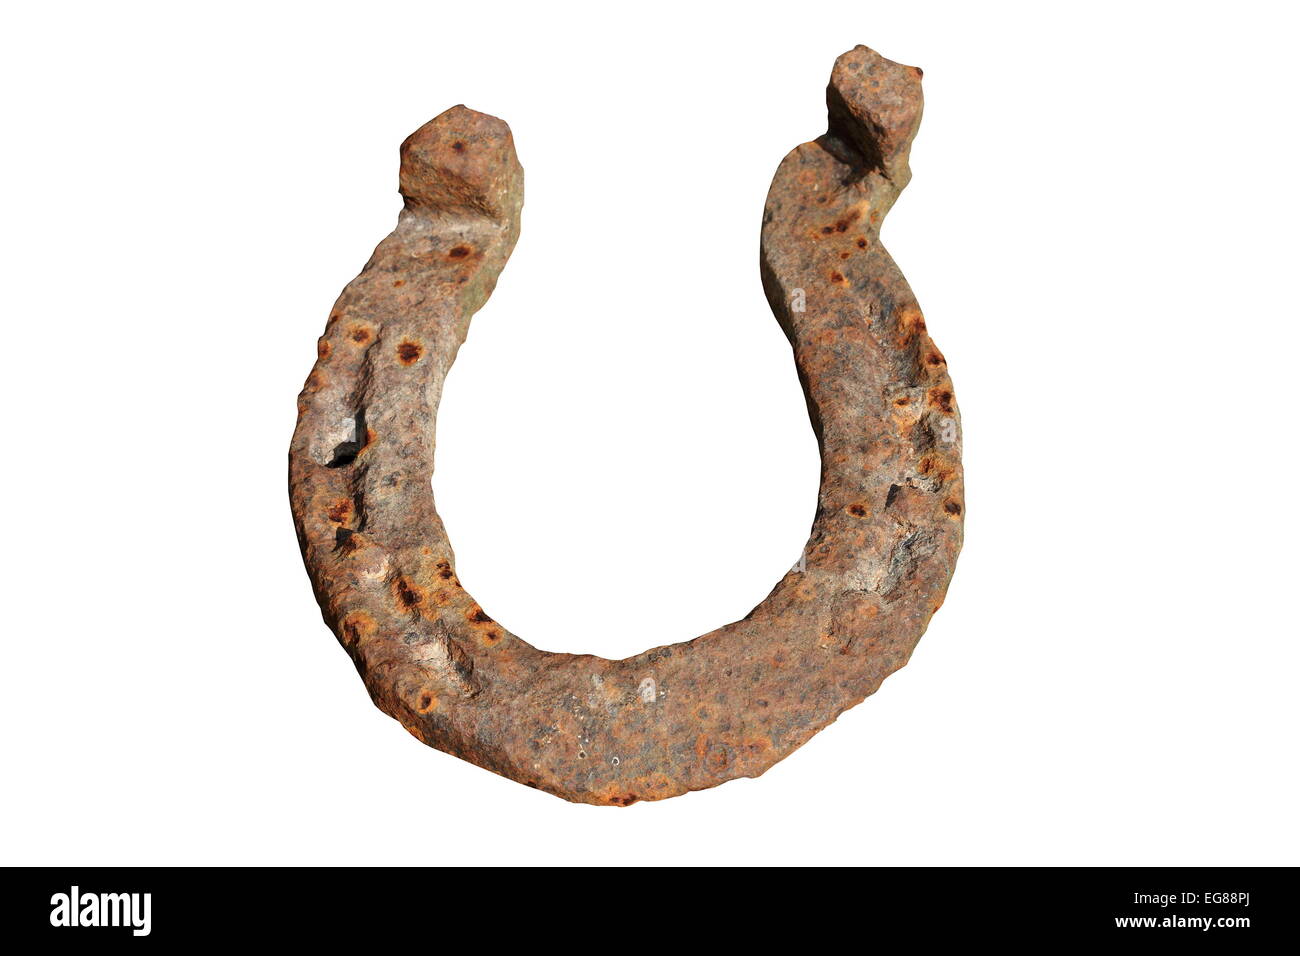 Rusty old horseshoe isolated over white background Banque D'Images